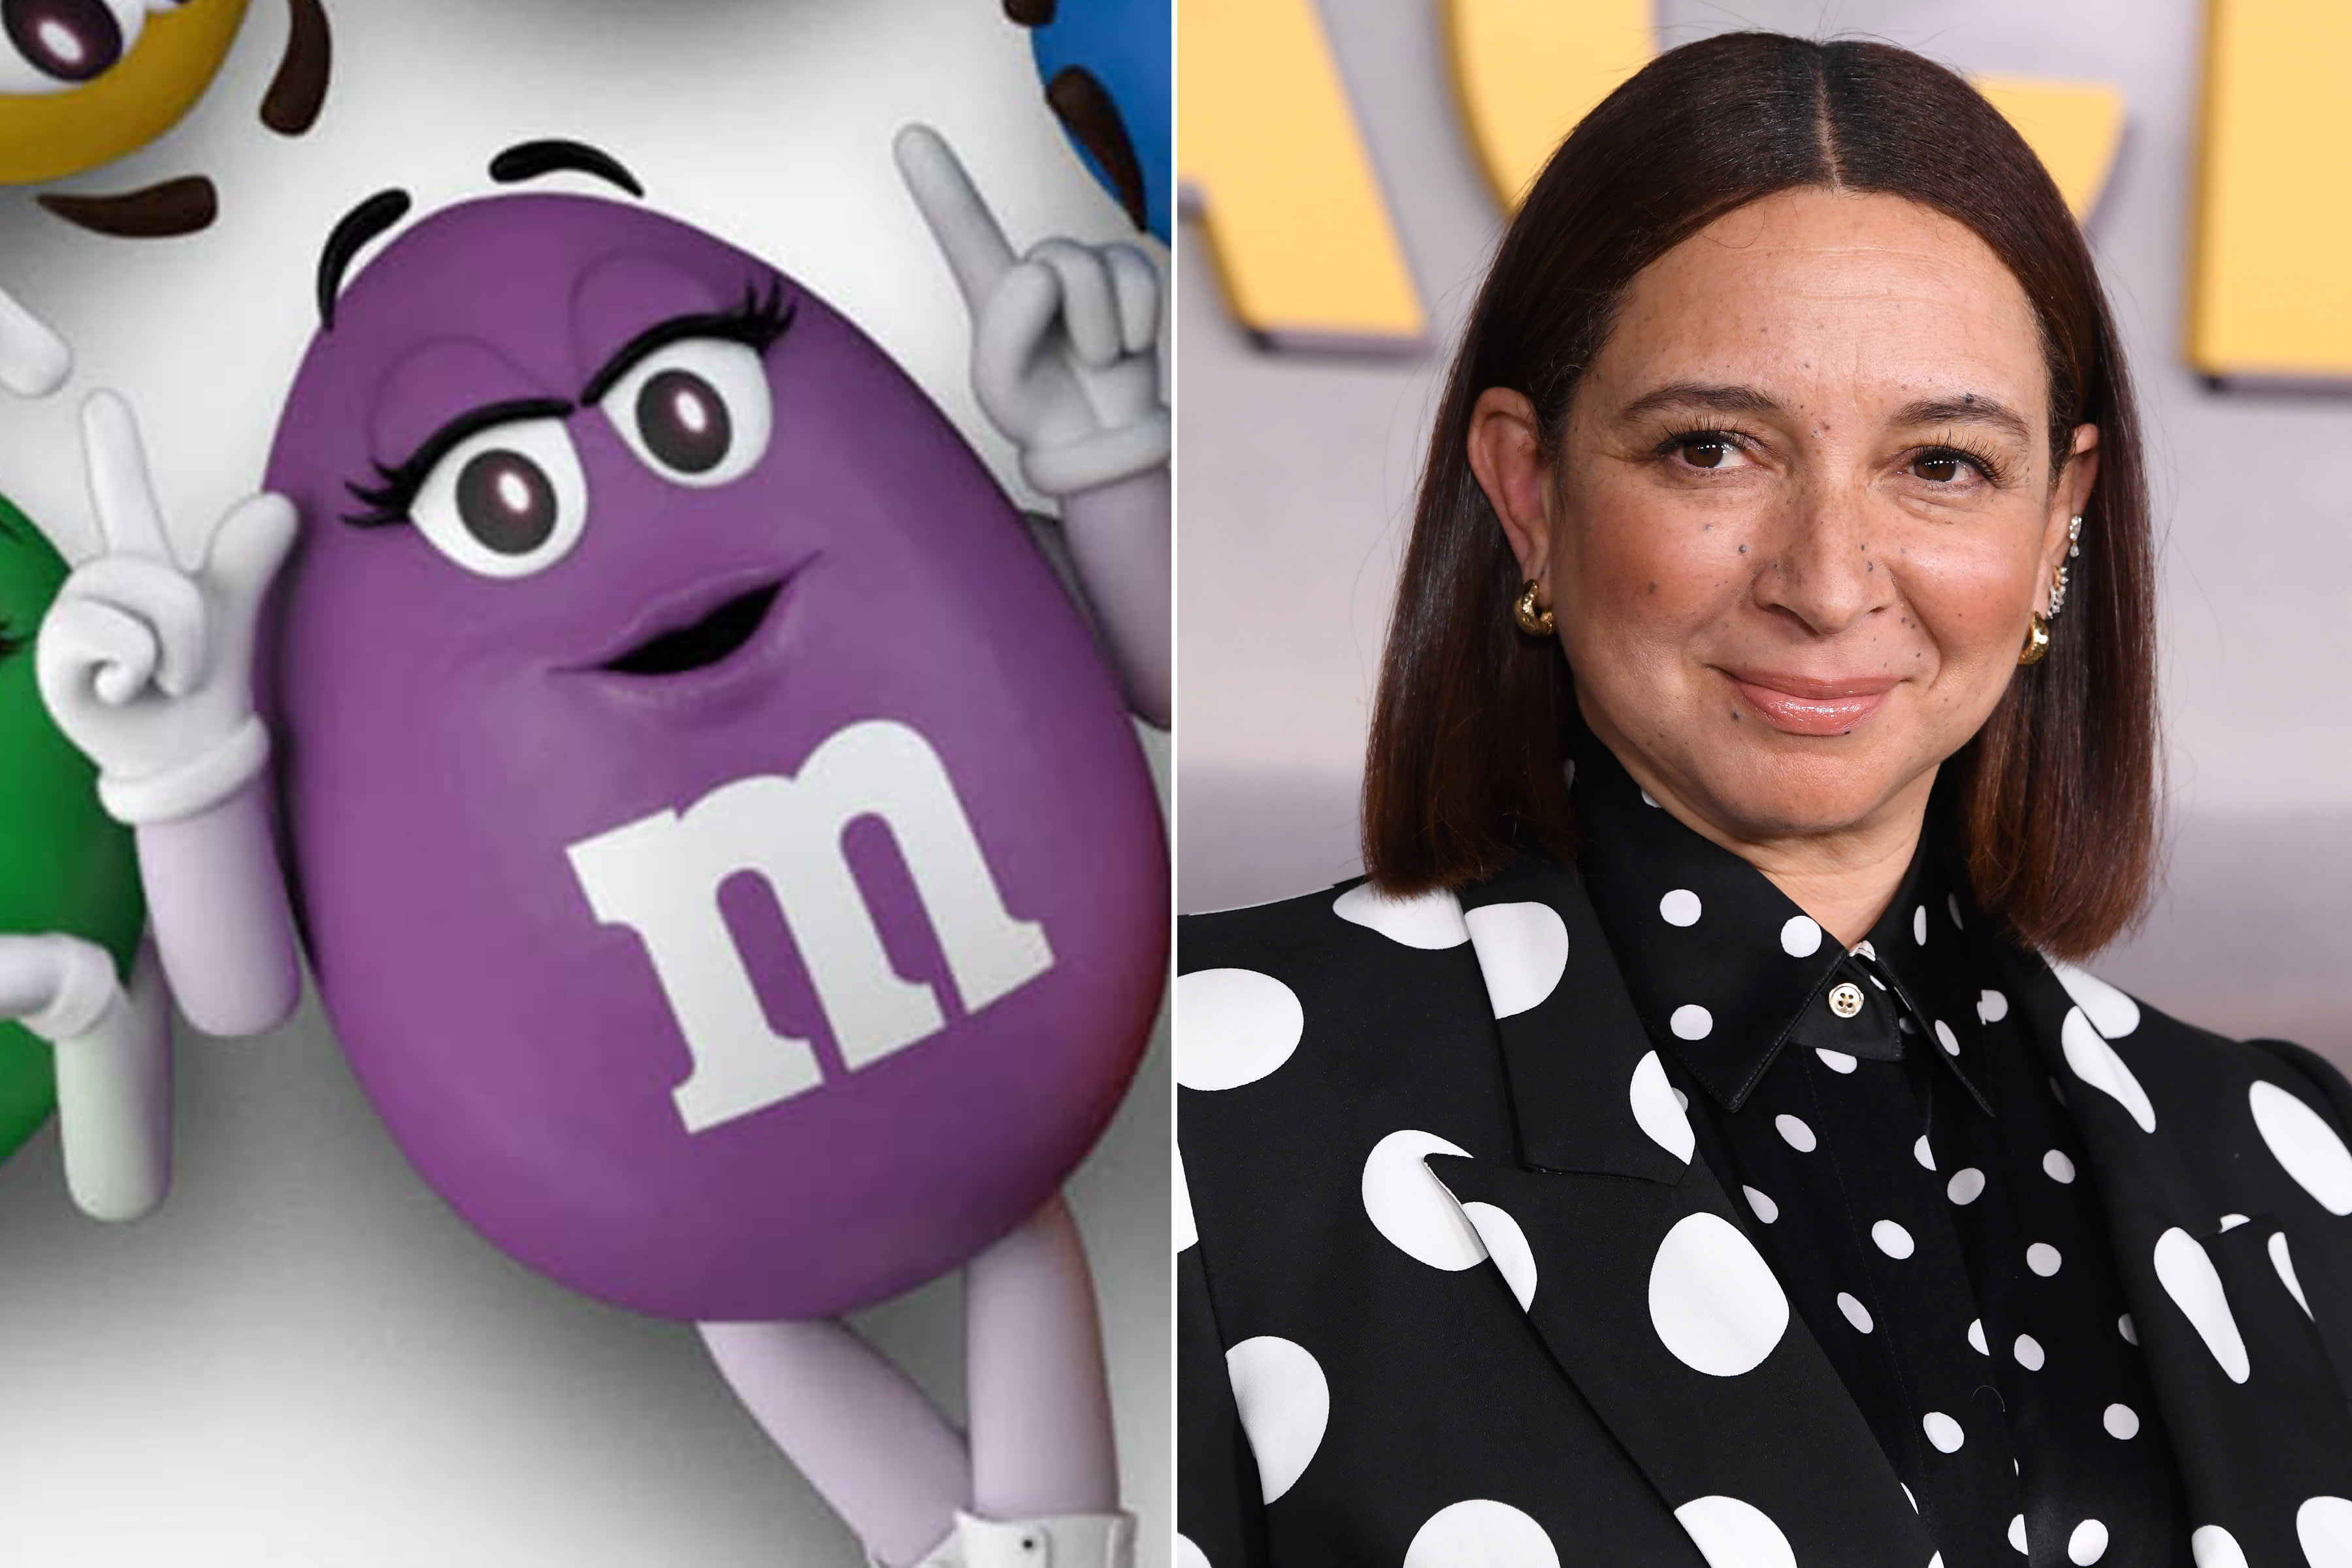 Purple M&M announced as newest color in iconic Mars candy